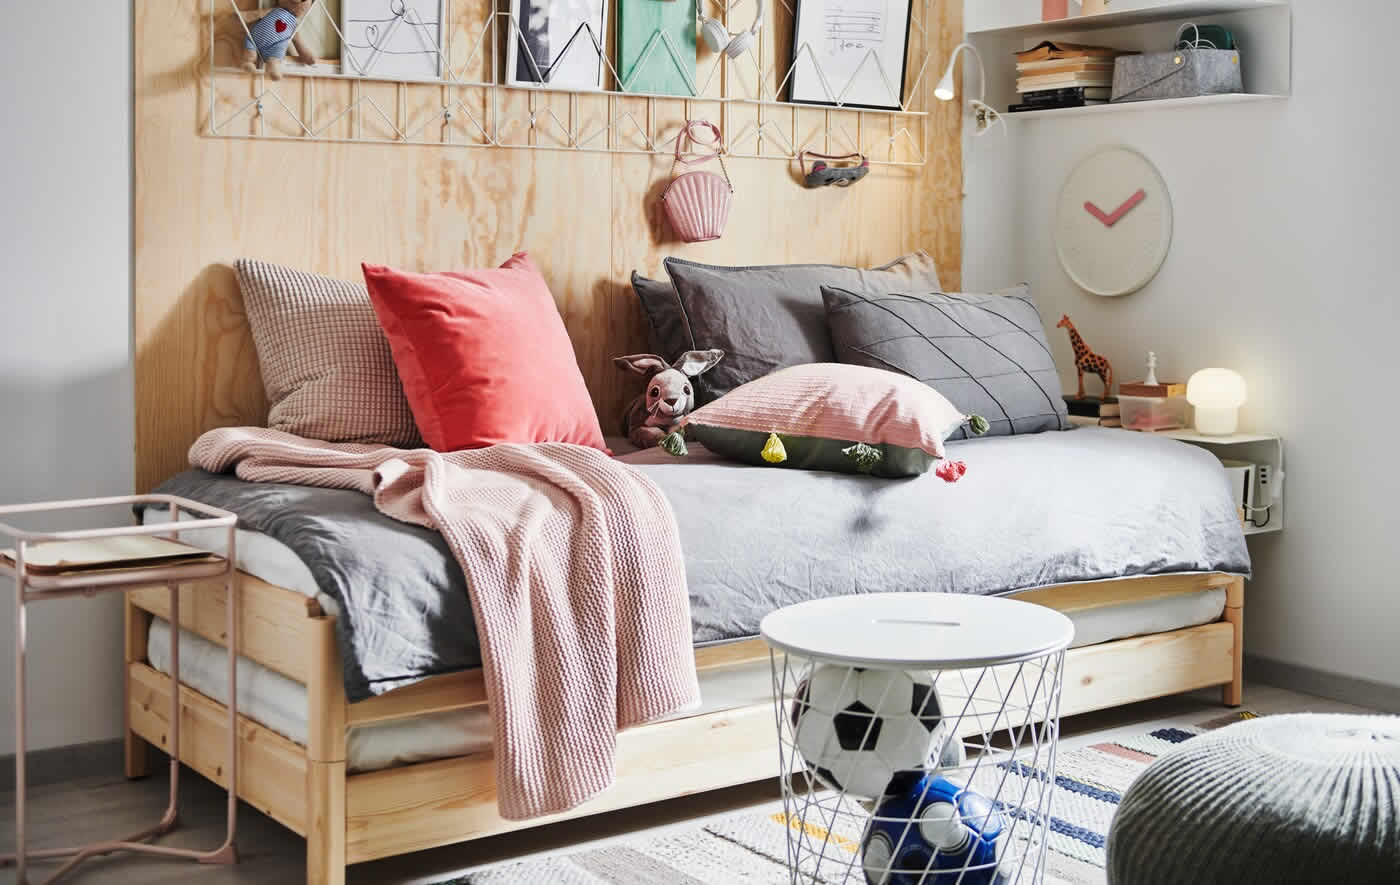 IKEA Ideas - A space that’s all you